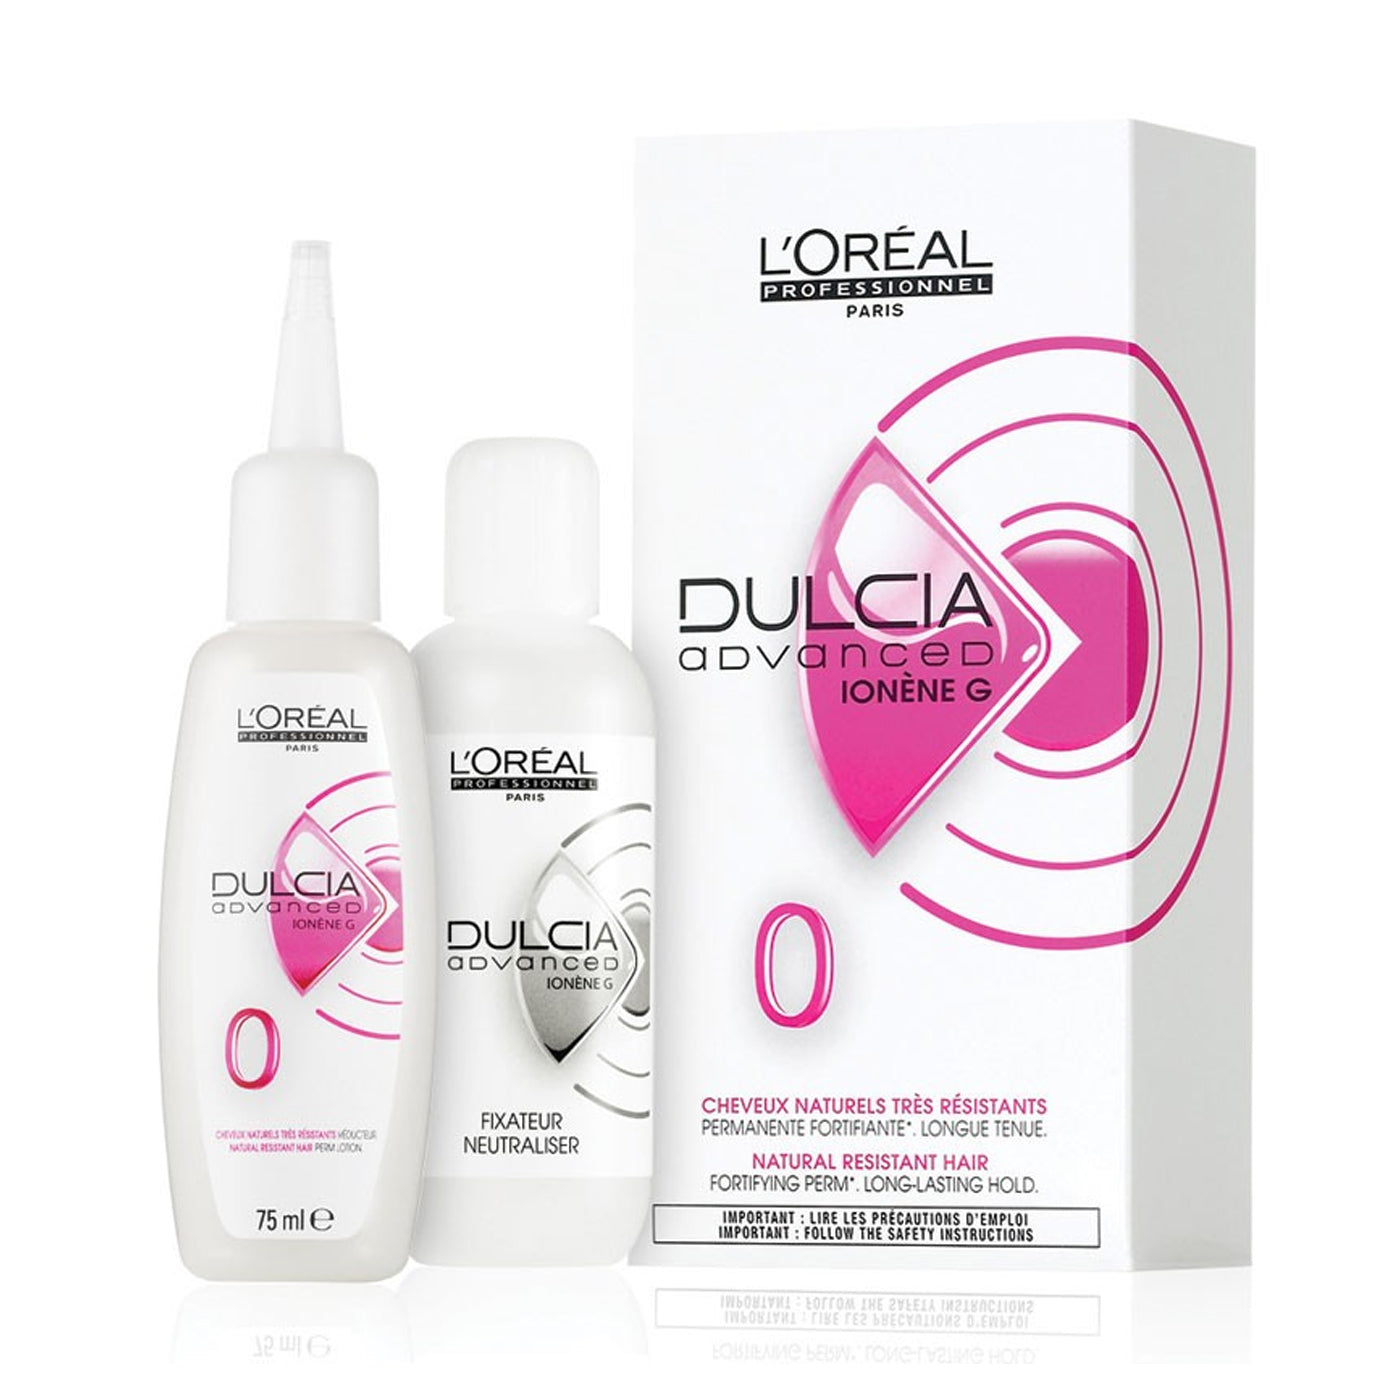 L'Oreal Dulcia Advanced Force 0 - Natural Resistant - Ultimate Hair and Beauty